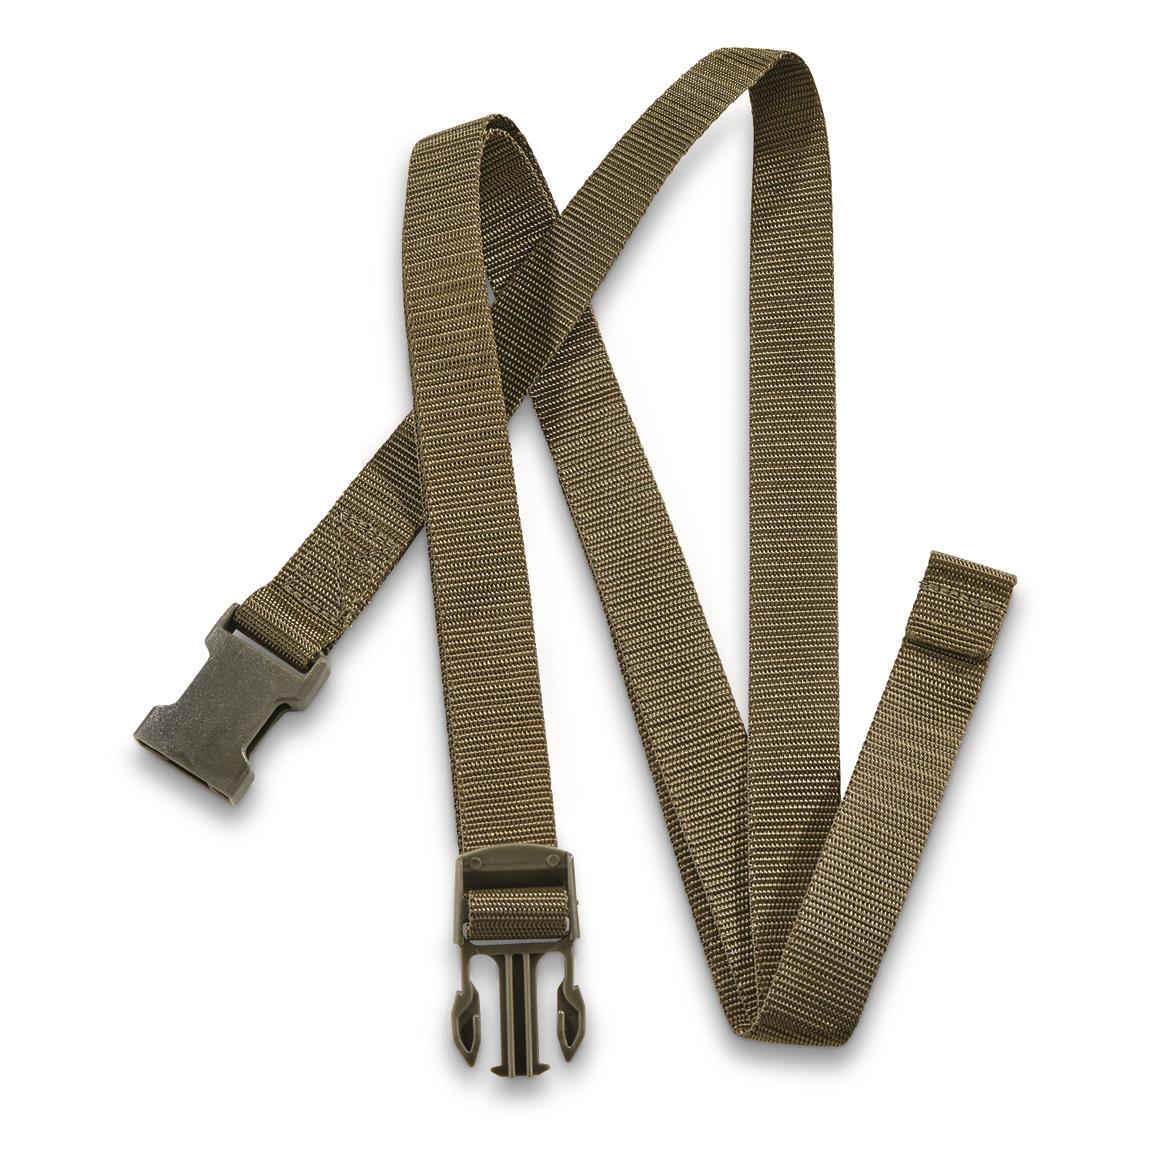 Swiss Military Surplus Straps with Buckles 8 Pack Olive Drab New